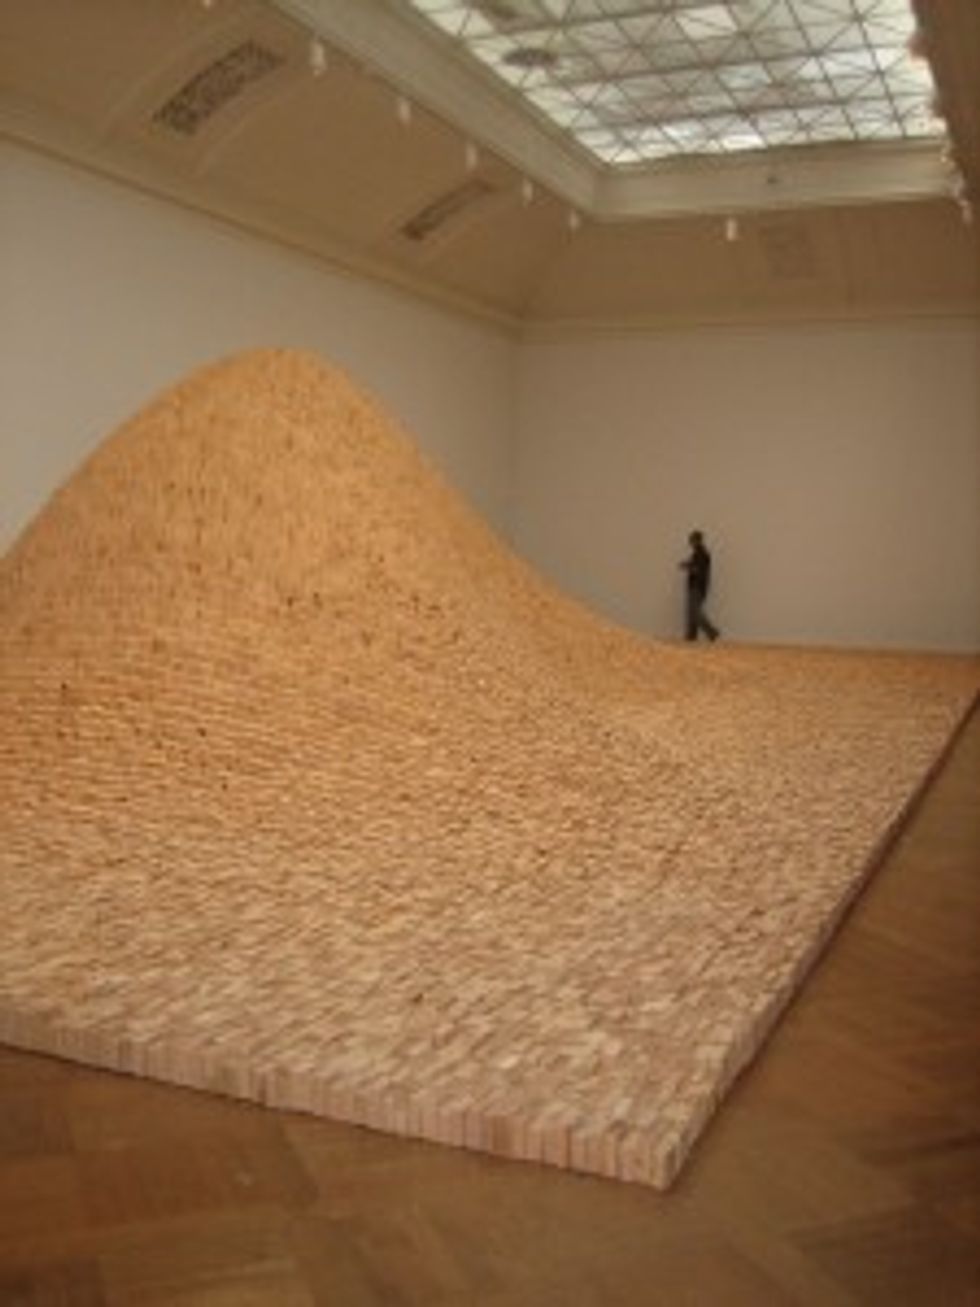 Blurry Photos From the Maya Lin Exhibit